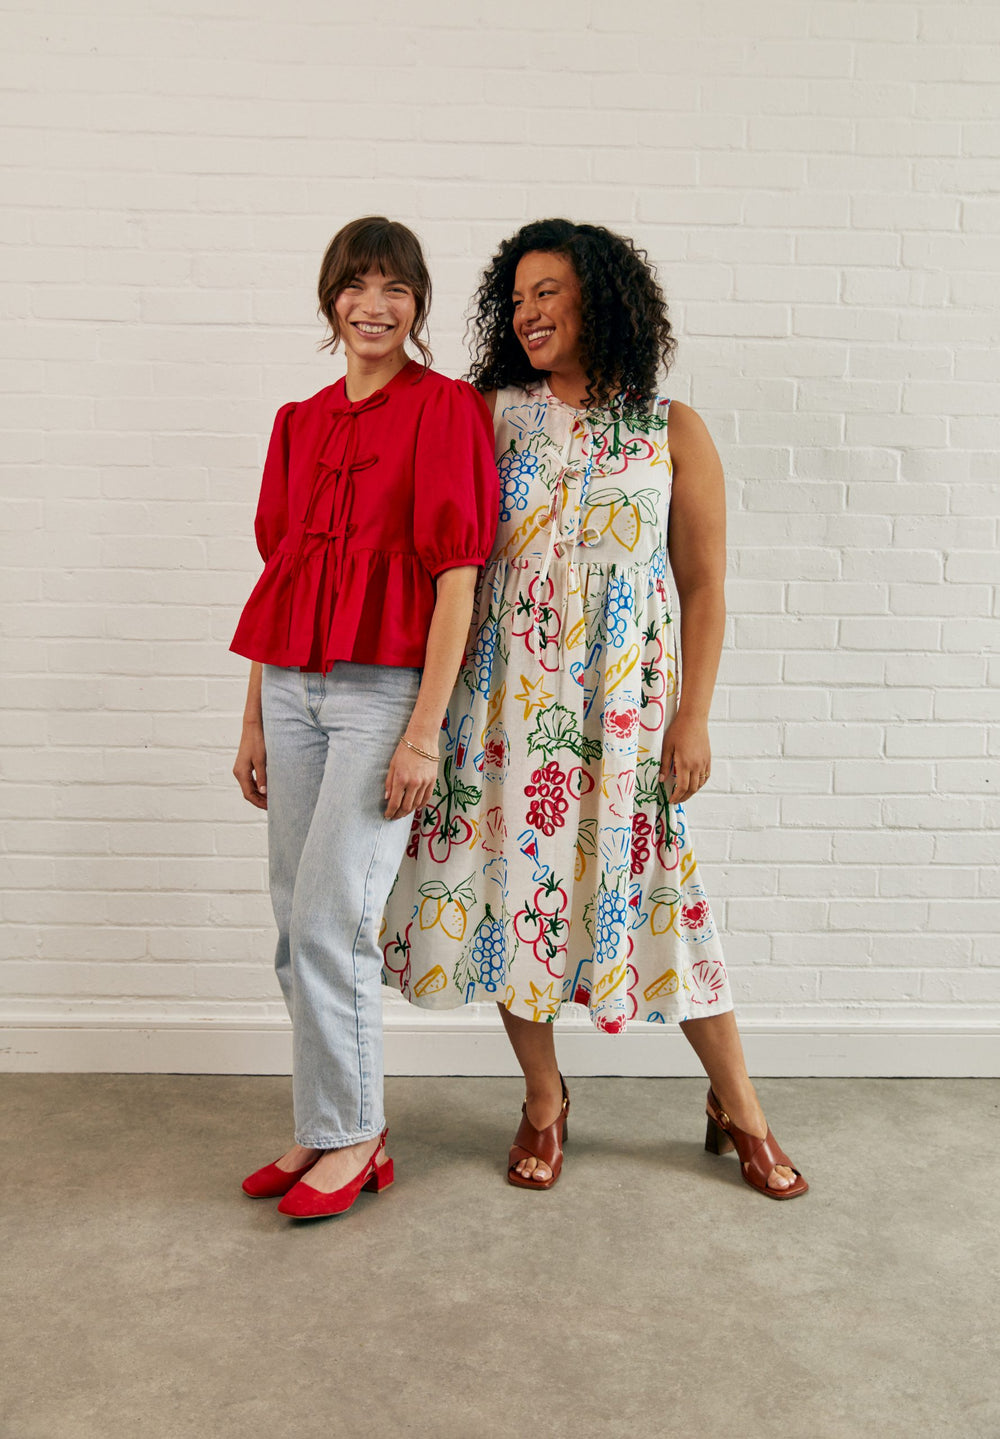 Women wearing the Fleur Dress and Blouse sewing pattern from Fabric Godmother on The Fold Line. A dress and blouse pattern made in cotton poplin, linen, lightweight denim, or brocade fabric, featuring a loose fit, bias finished neckline, optional mid-length sleeves, bow tie closures at the front, and a gathered peplum or skirt.